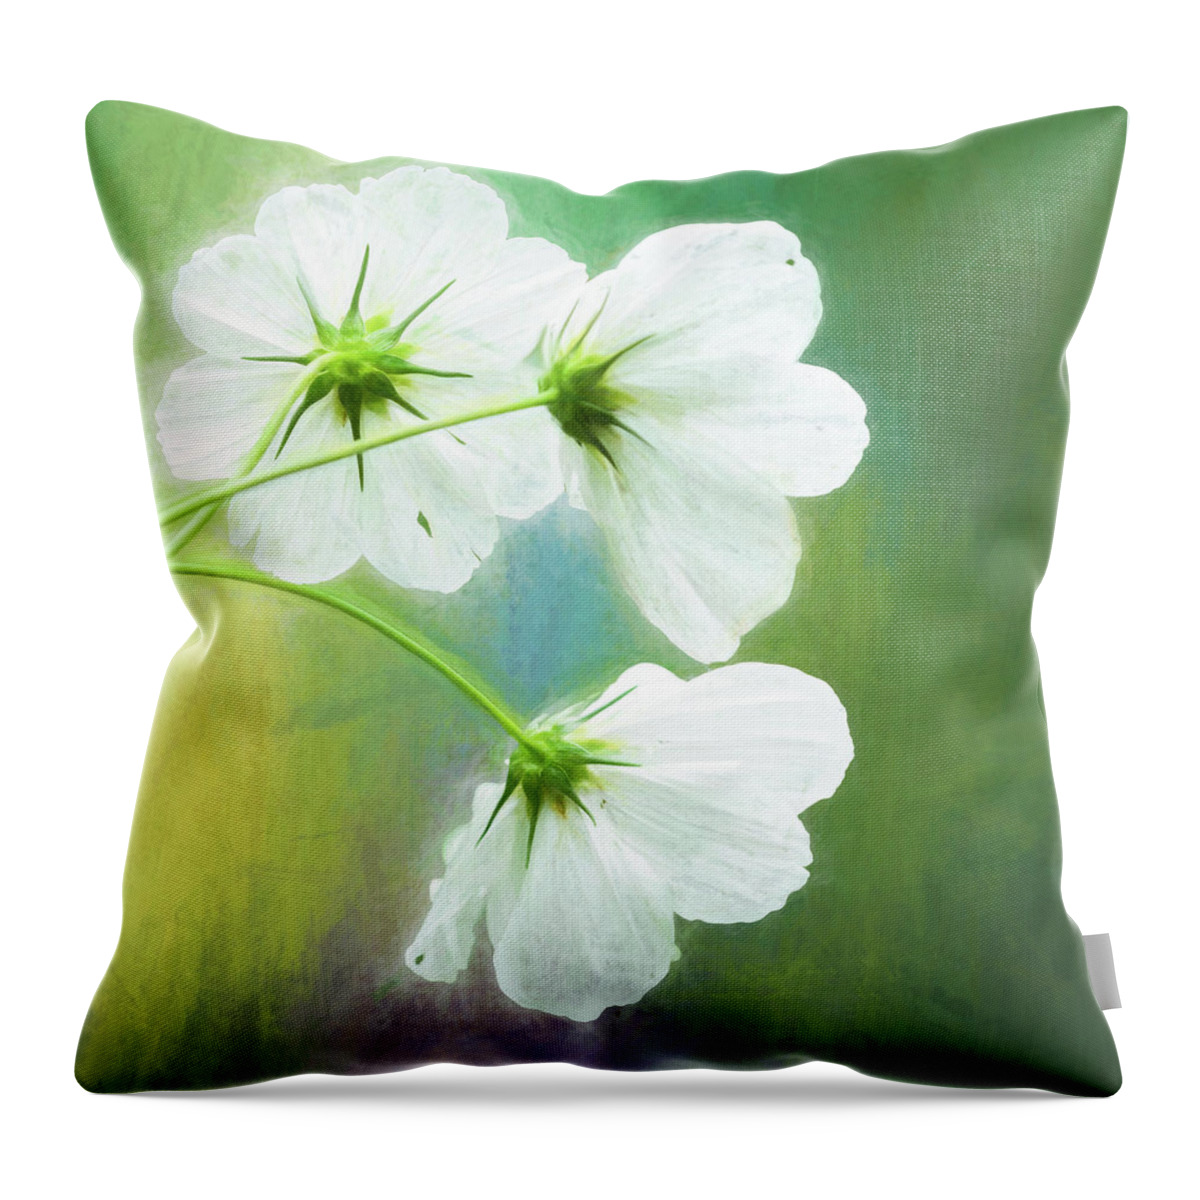 Colors Throw Pillow featuring the photograph Painted Cosmos Trio by Anita Pollak